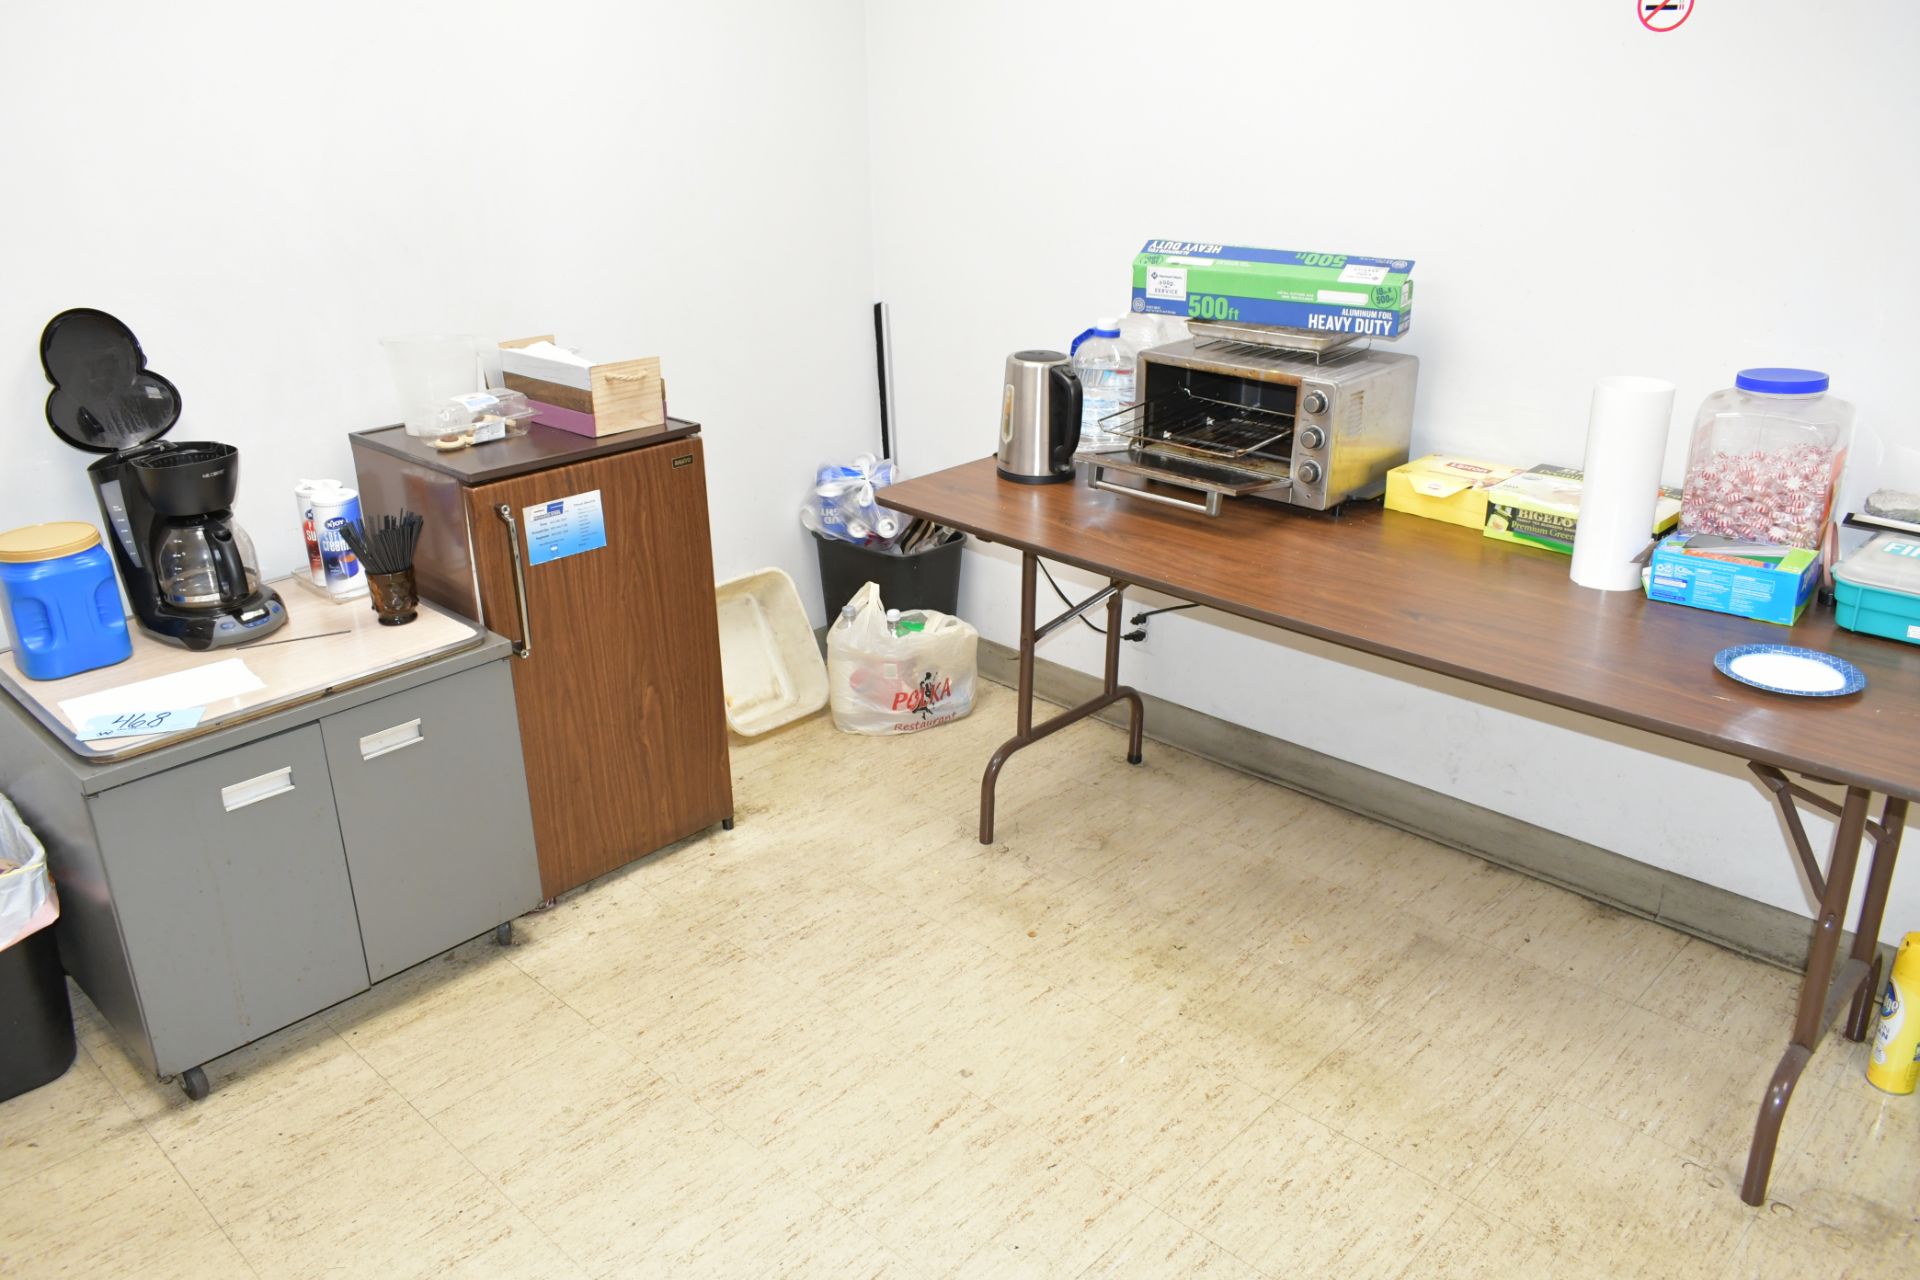 Lot-Small Office Refrigerator, (1) Table, (1) Stand, (1) Short Cabinet, (1) Coffee Maker, Etc.